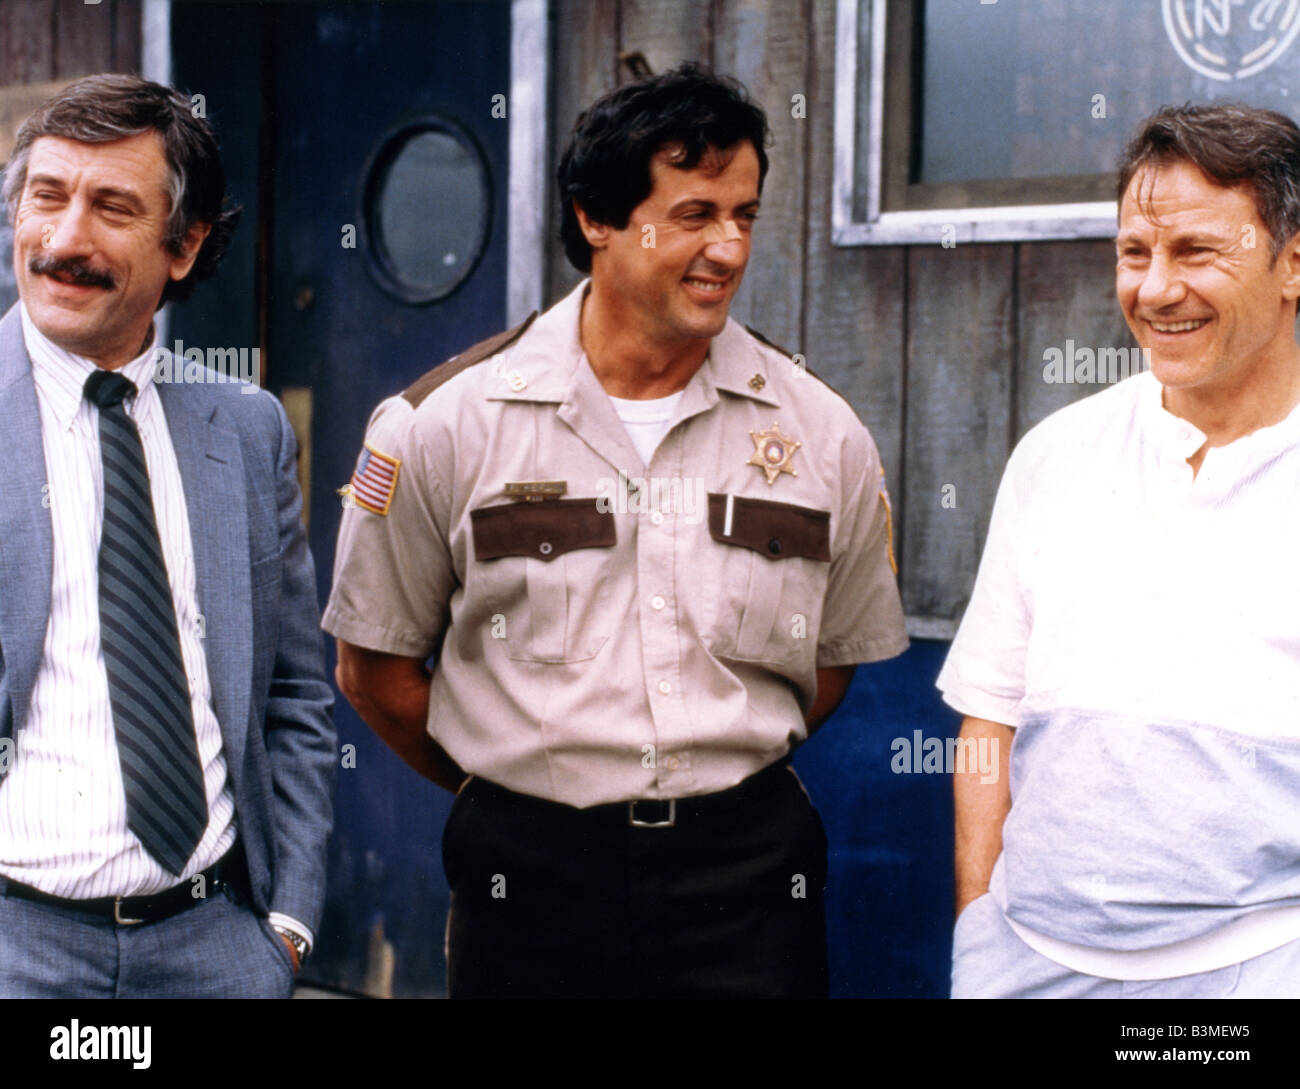 COP LAND  1997 Buena Vista film with Sylvester Stallone centre and Harvey Keitel at right Stock Photo